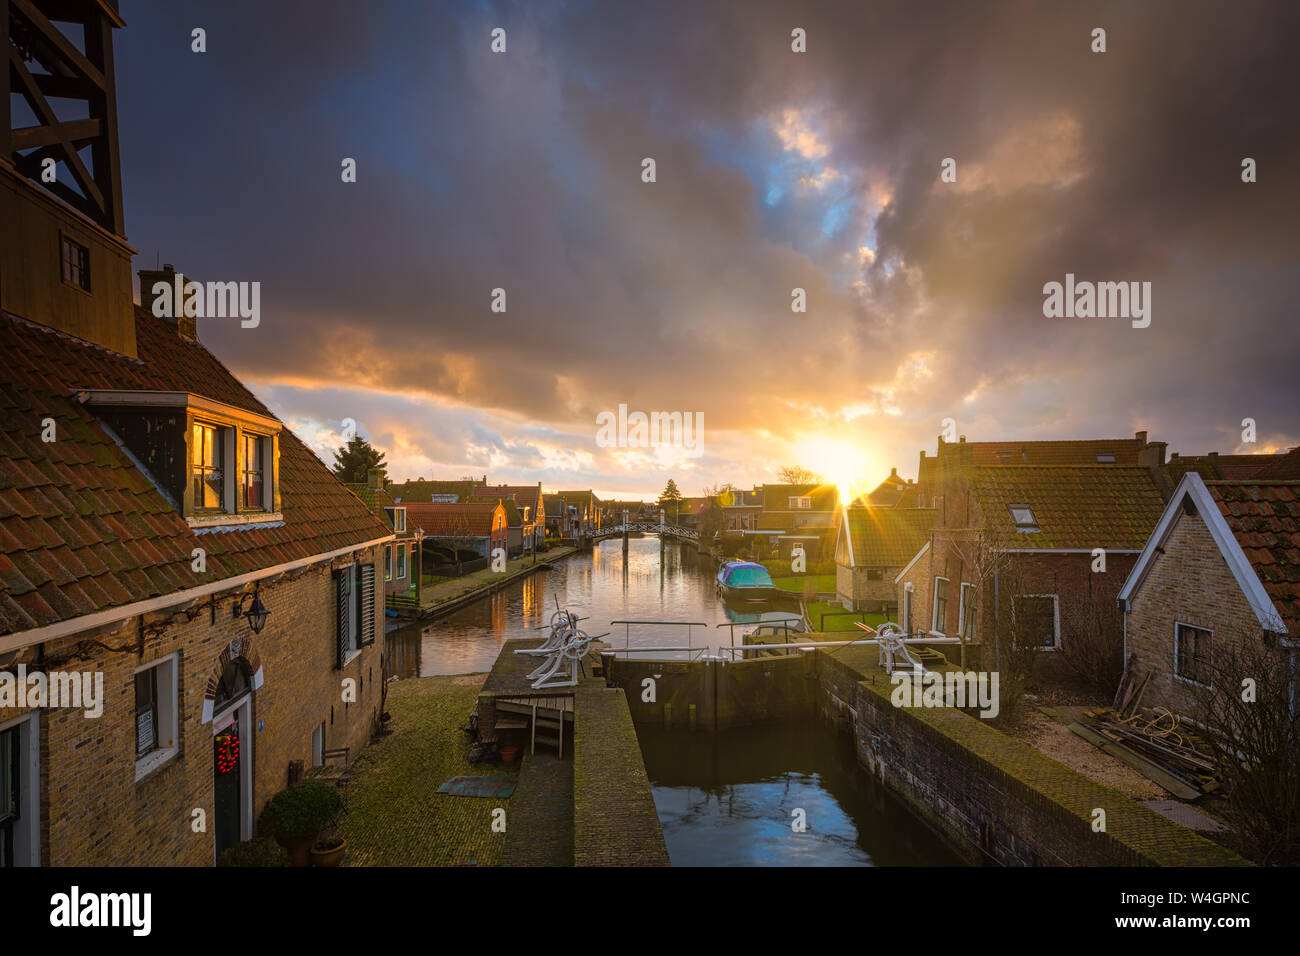 An historic town and popular travel destination in the Netherlands at the IJsselmeer with old houses and canals - Hindeloopen, The Netherlands Stock Photo